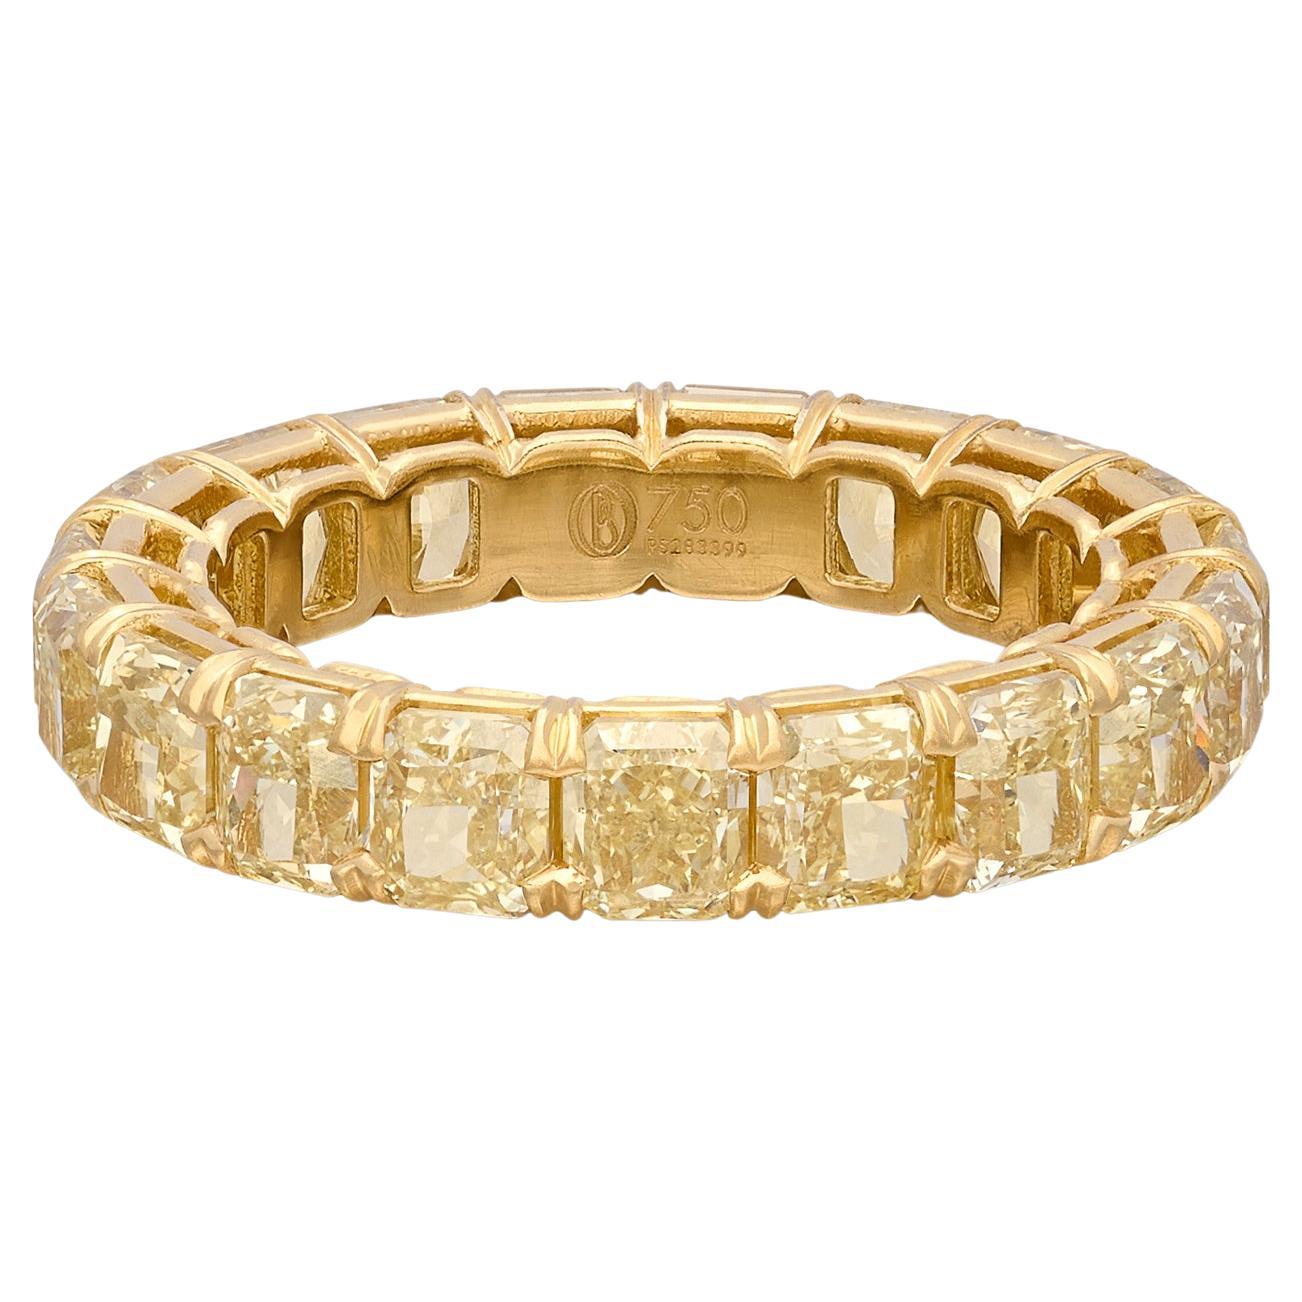 Exceptional 5.70ct Yellow Radiant Cut Diamond Eternity Band For Sale